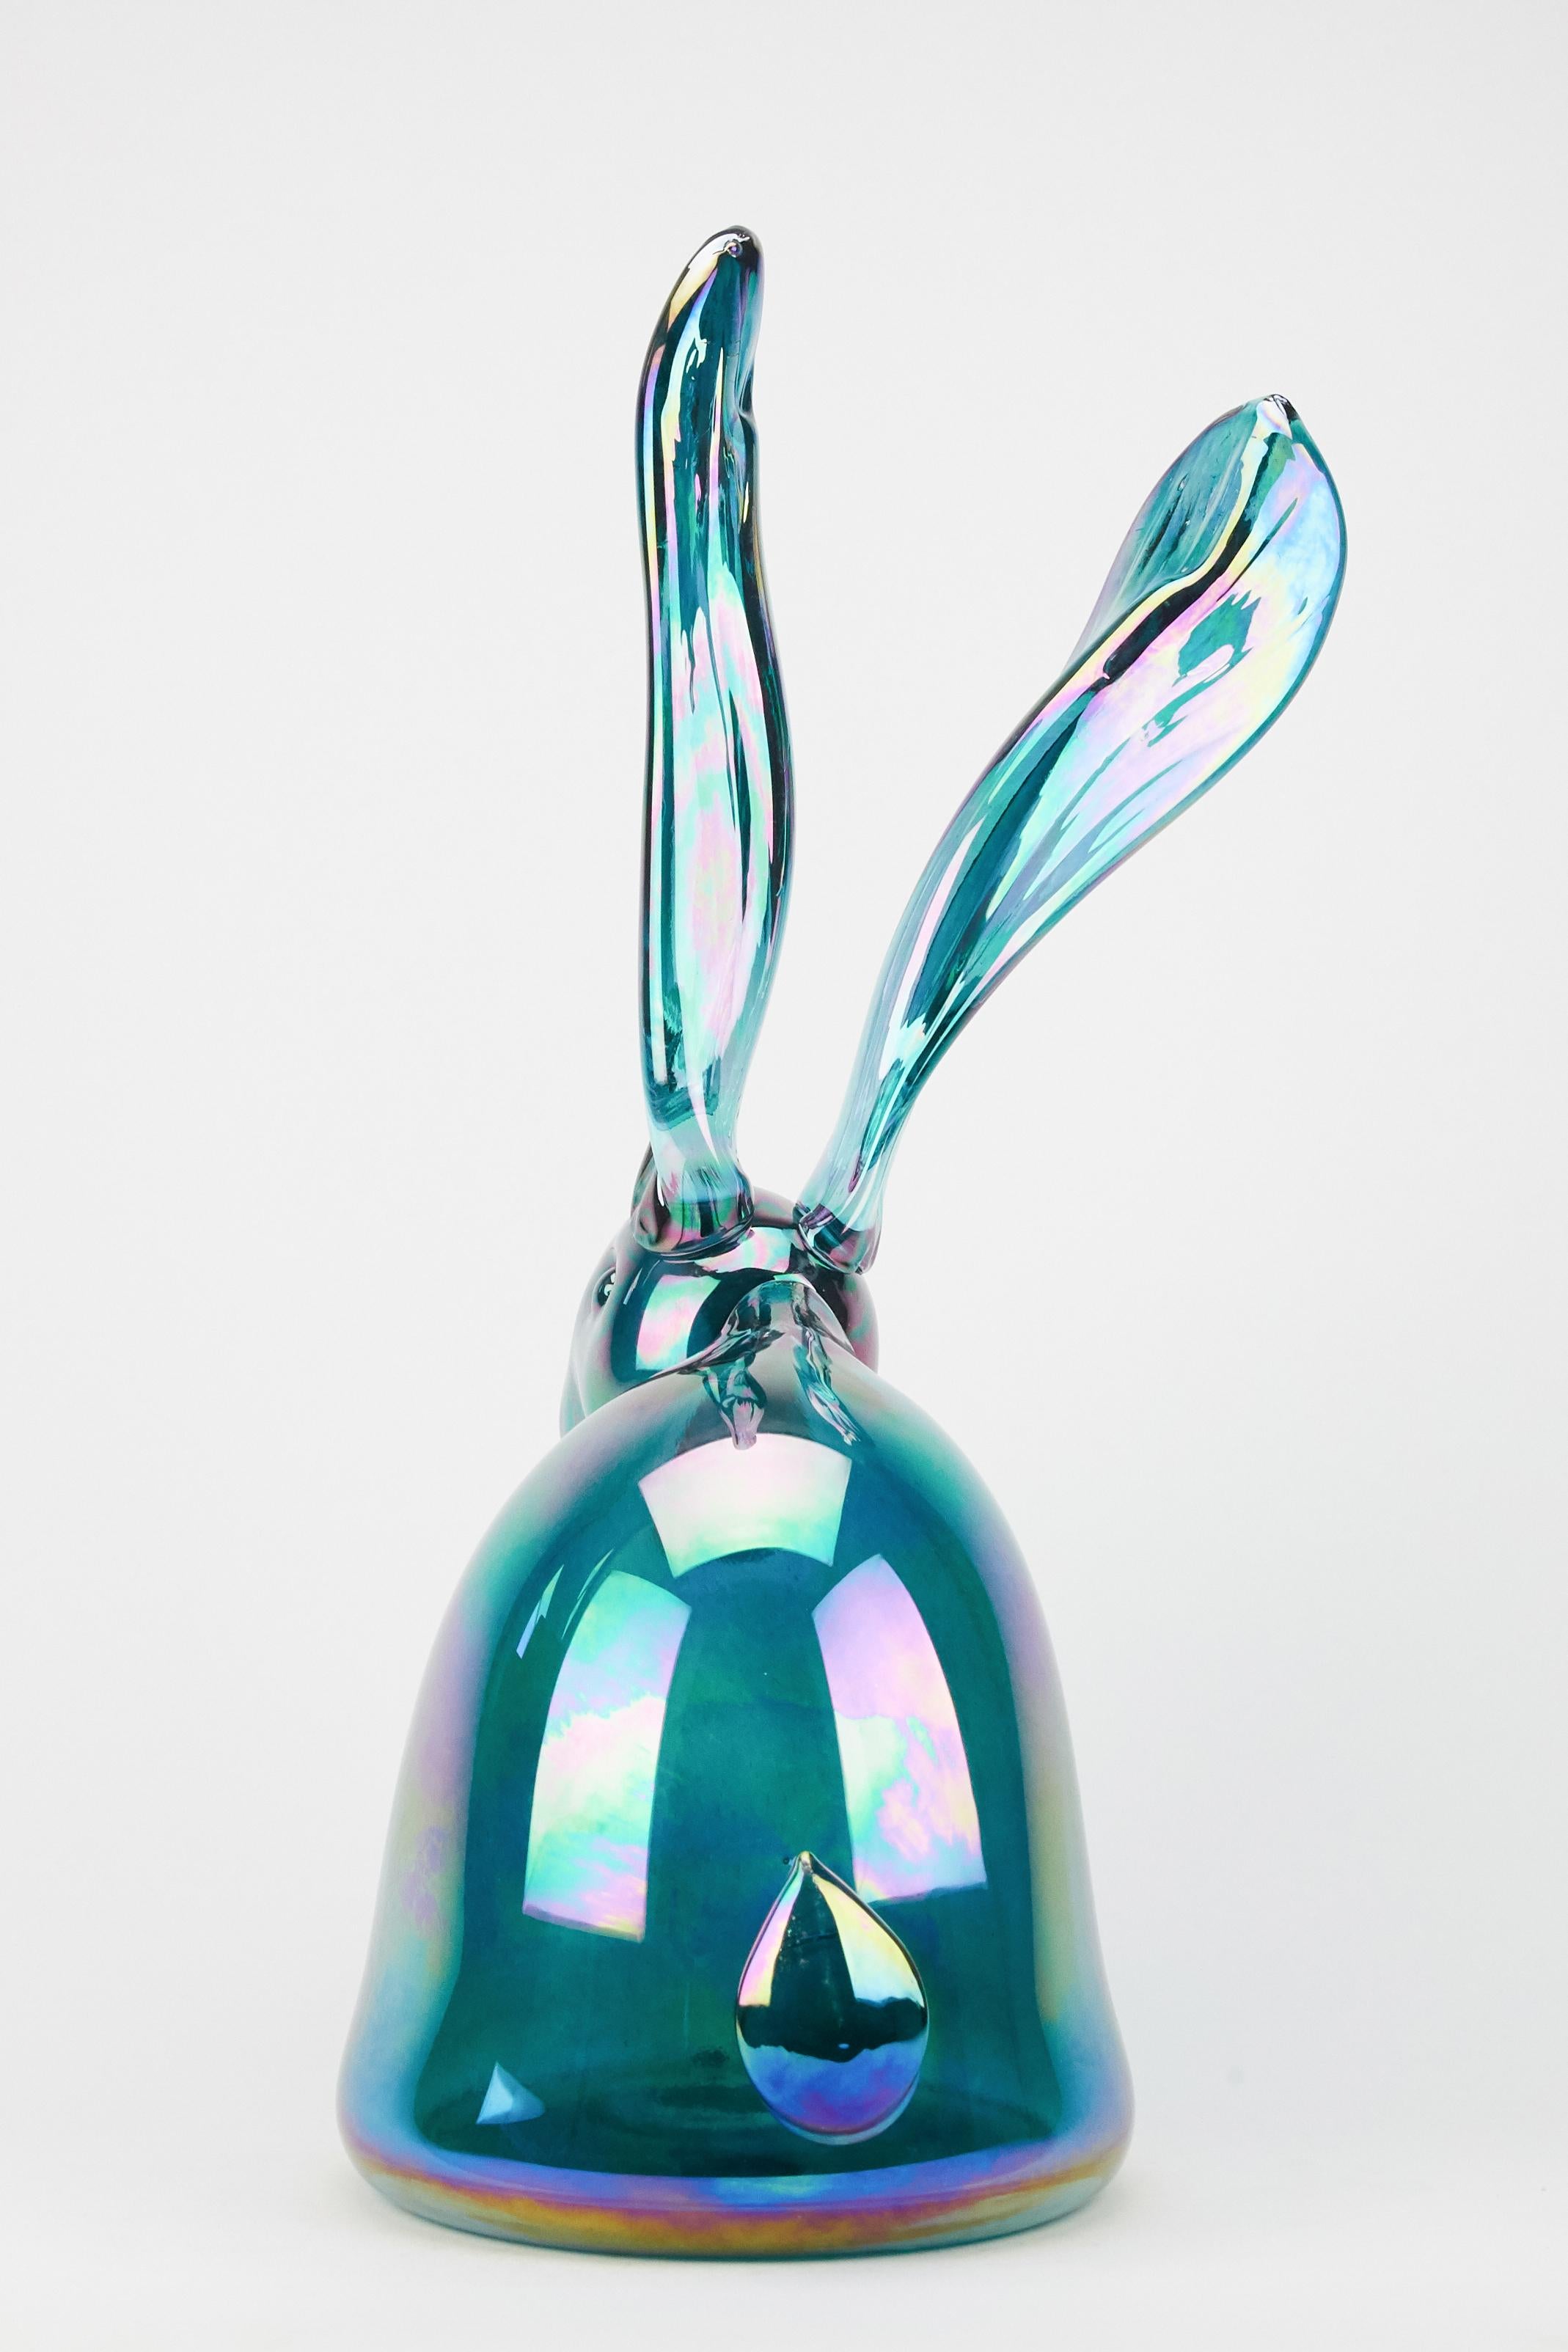 From canvas to kiln, Hunt Slonem brings his signature subject to life like never before. This wonderful hand-blown sculpture depicts one of Slonem's signature bunnies in beautiful blue glass. Slonem’s new blown-glass sculptures are a sublime visual